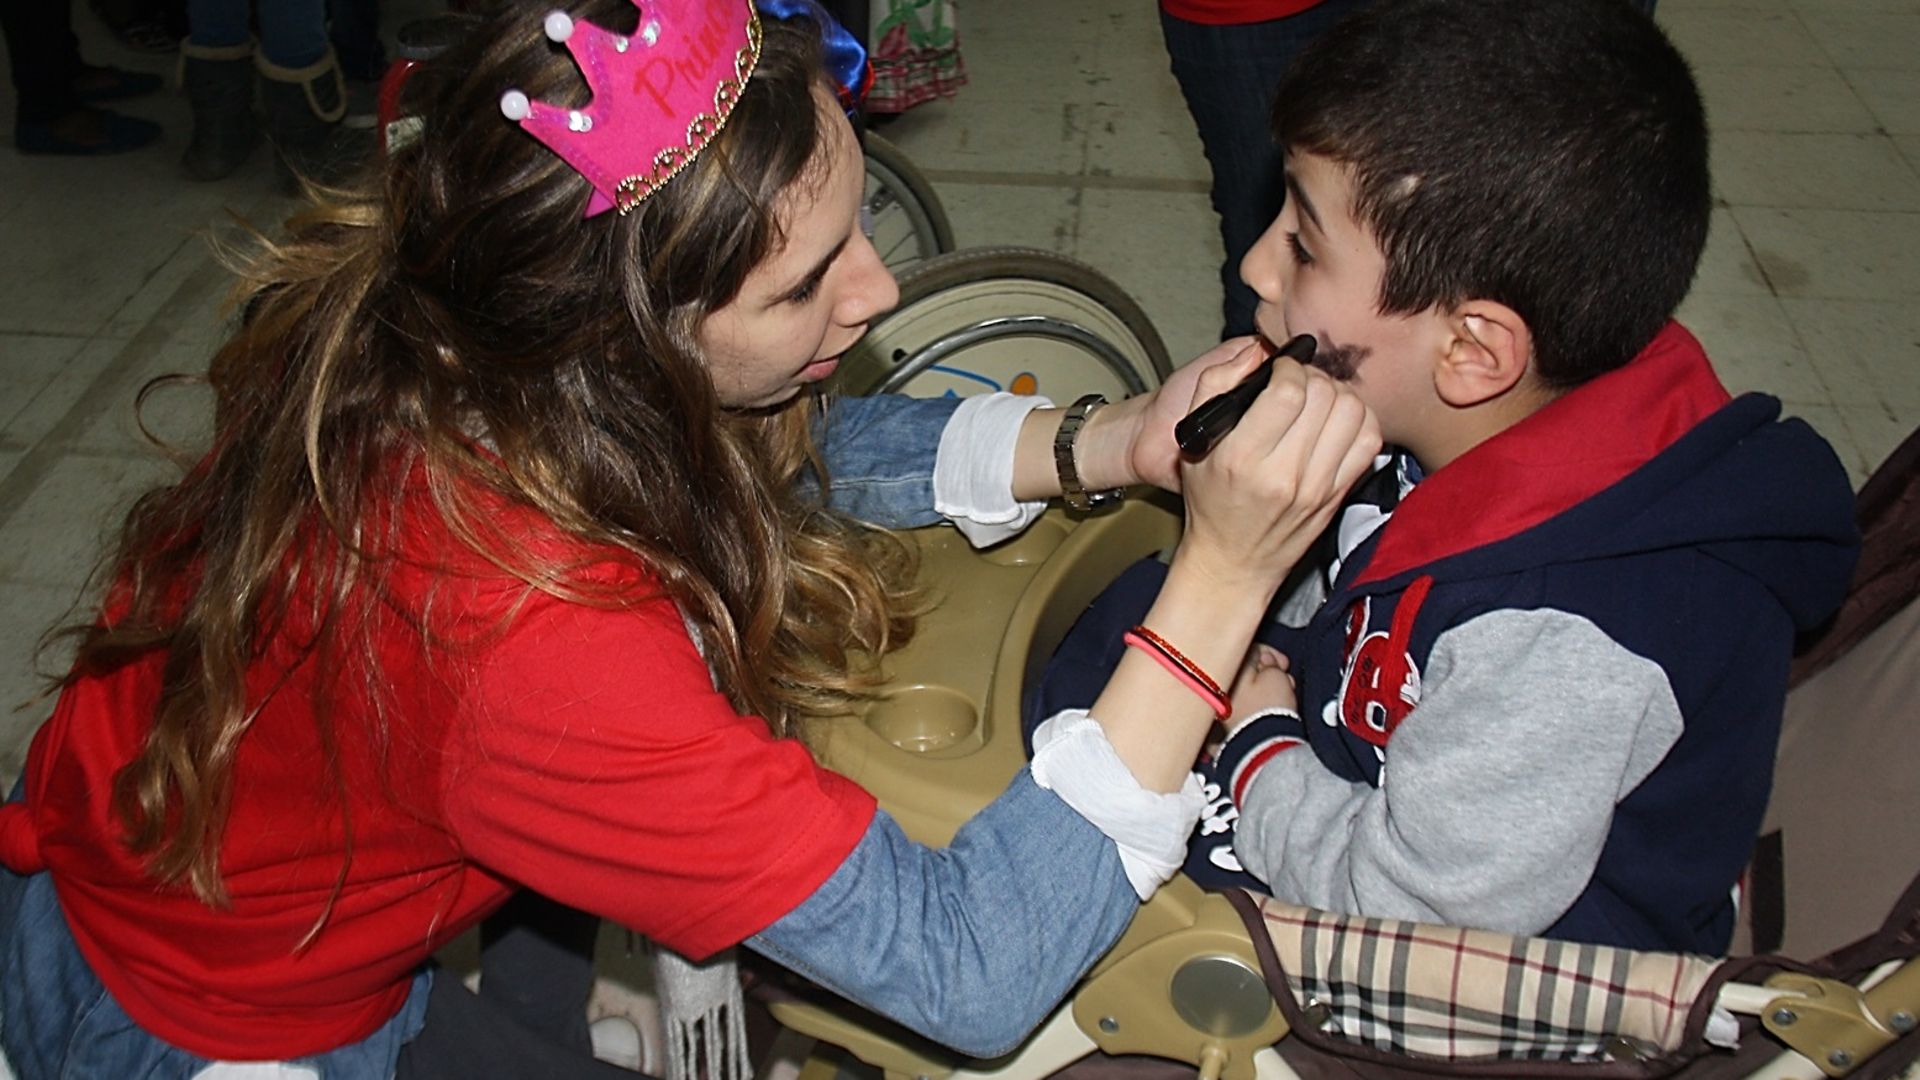 A volunteer princess paints the face of a young boy